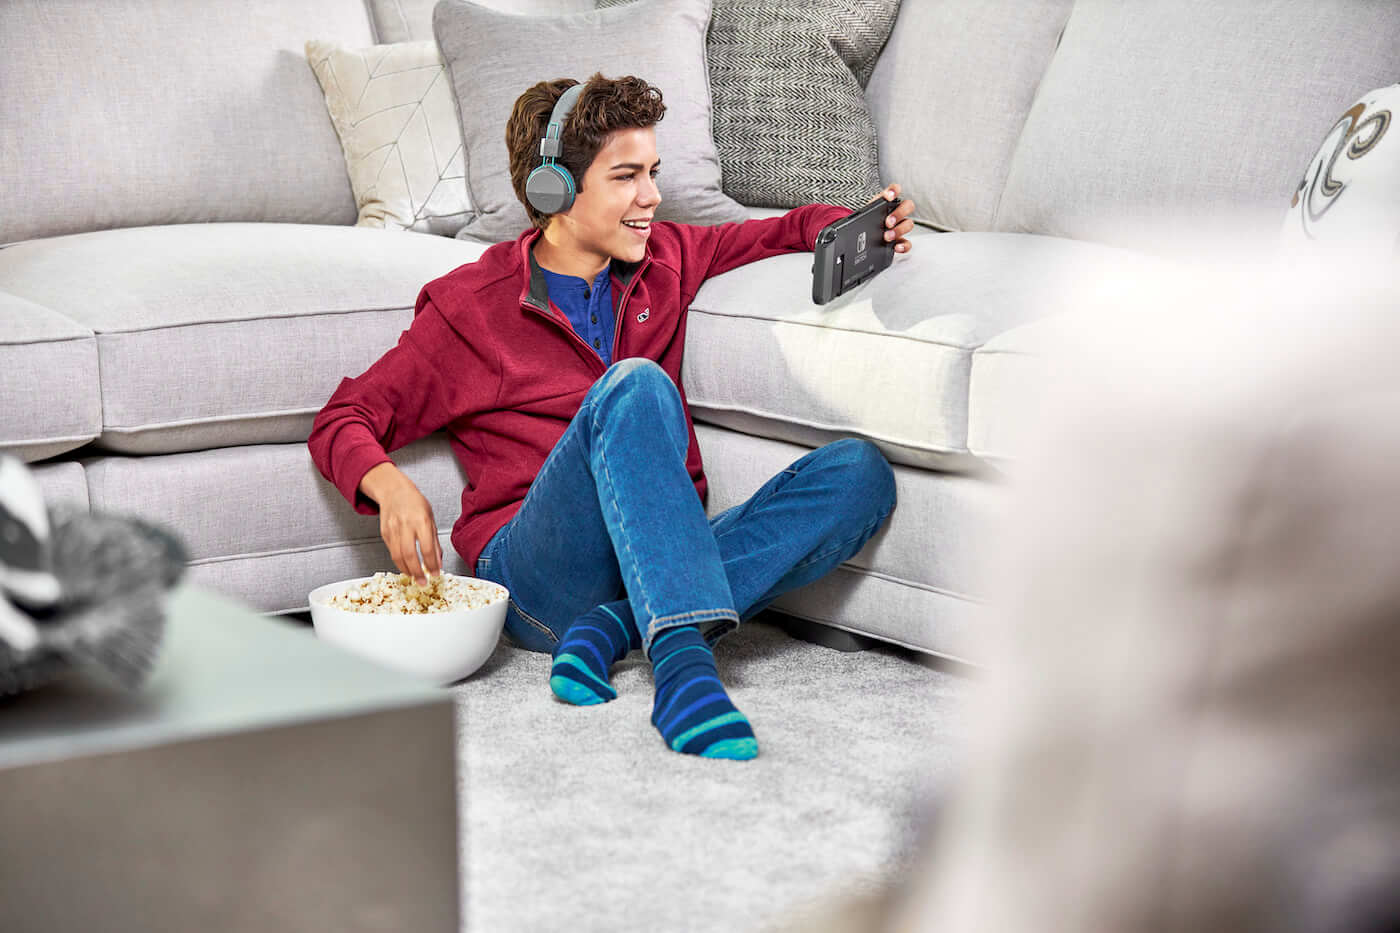 Boy playing video game on carpet next to couch